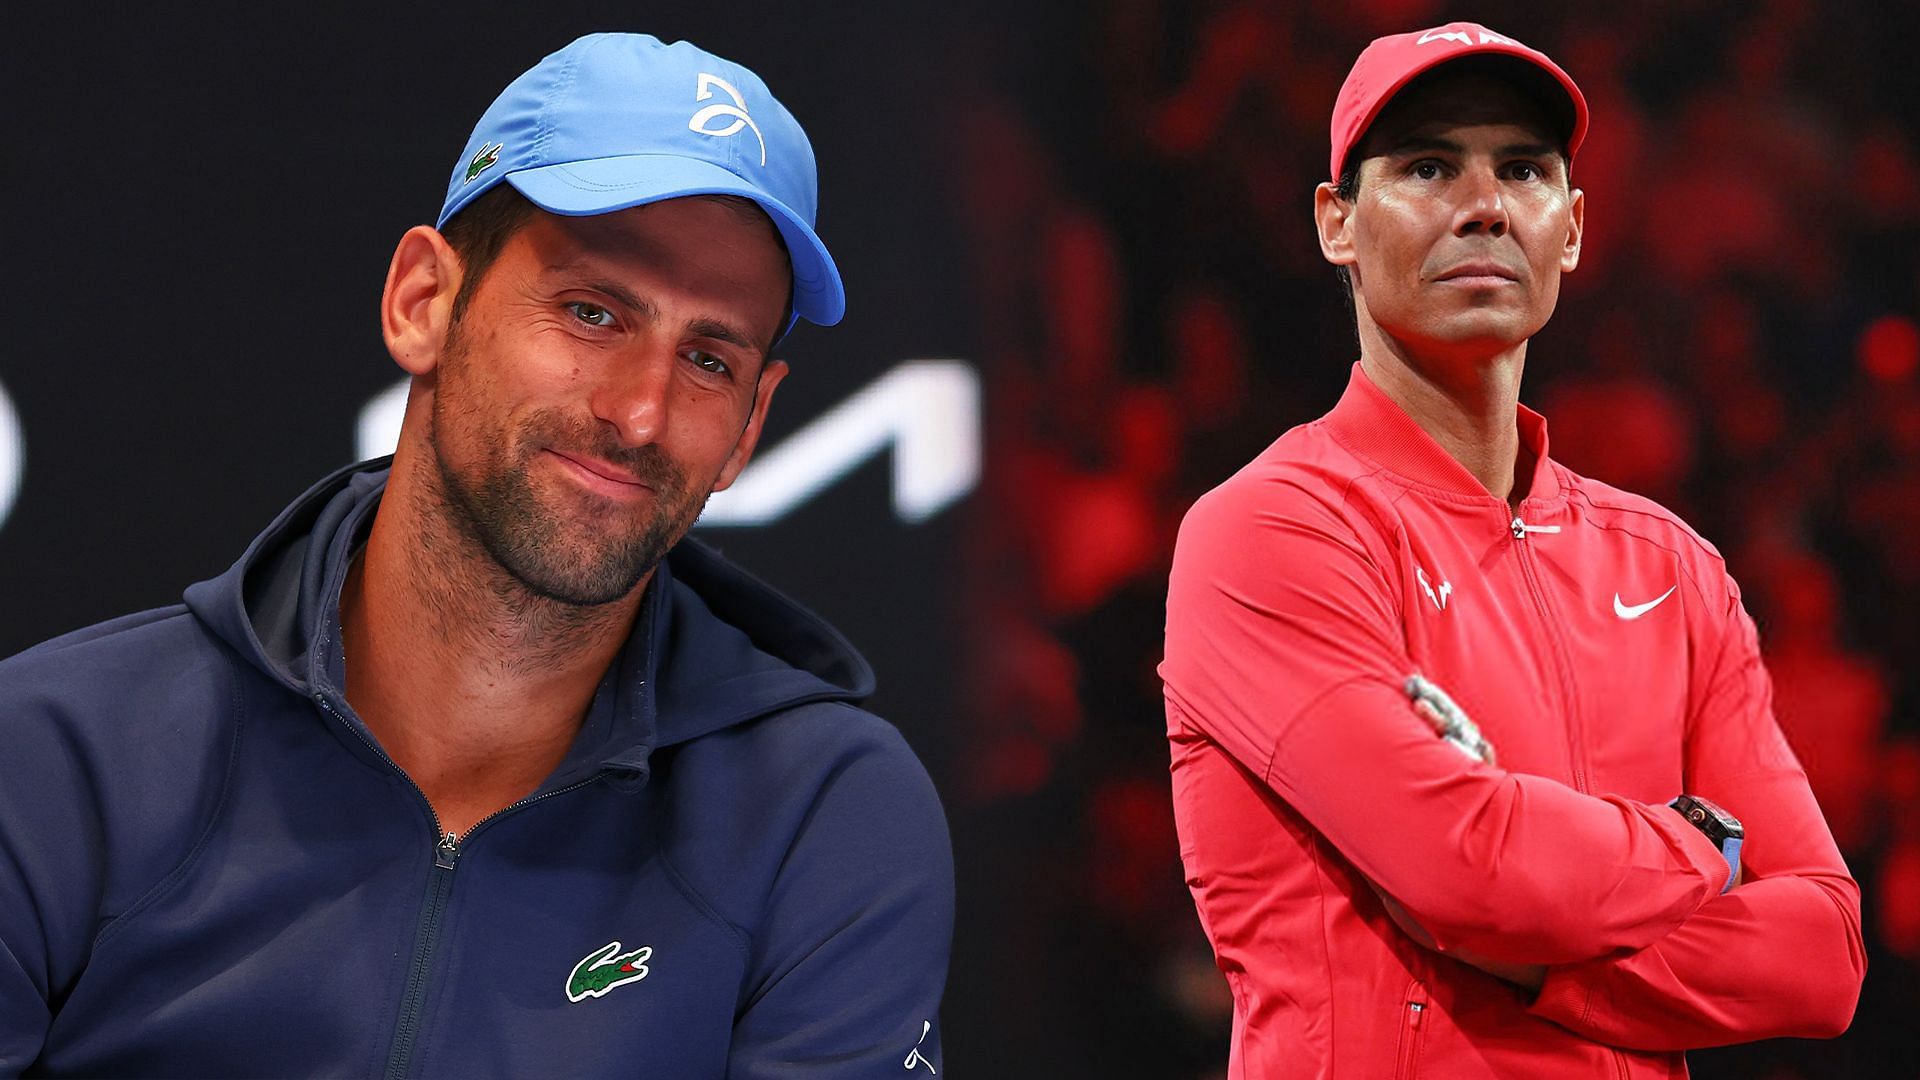 Novak Djokovic expressed his hope of facing great rival Rafael Nadal at least once before the Spaniard